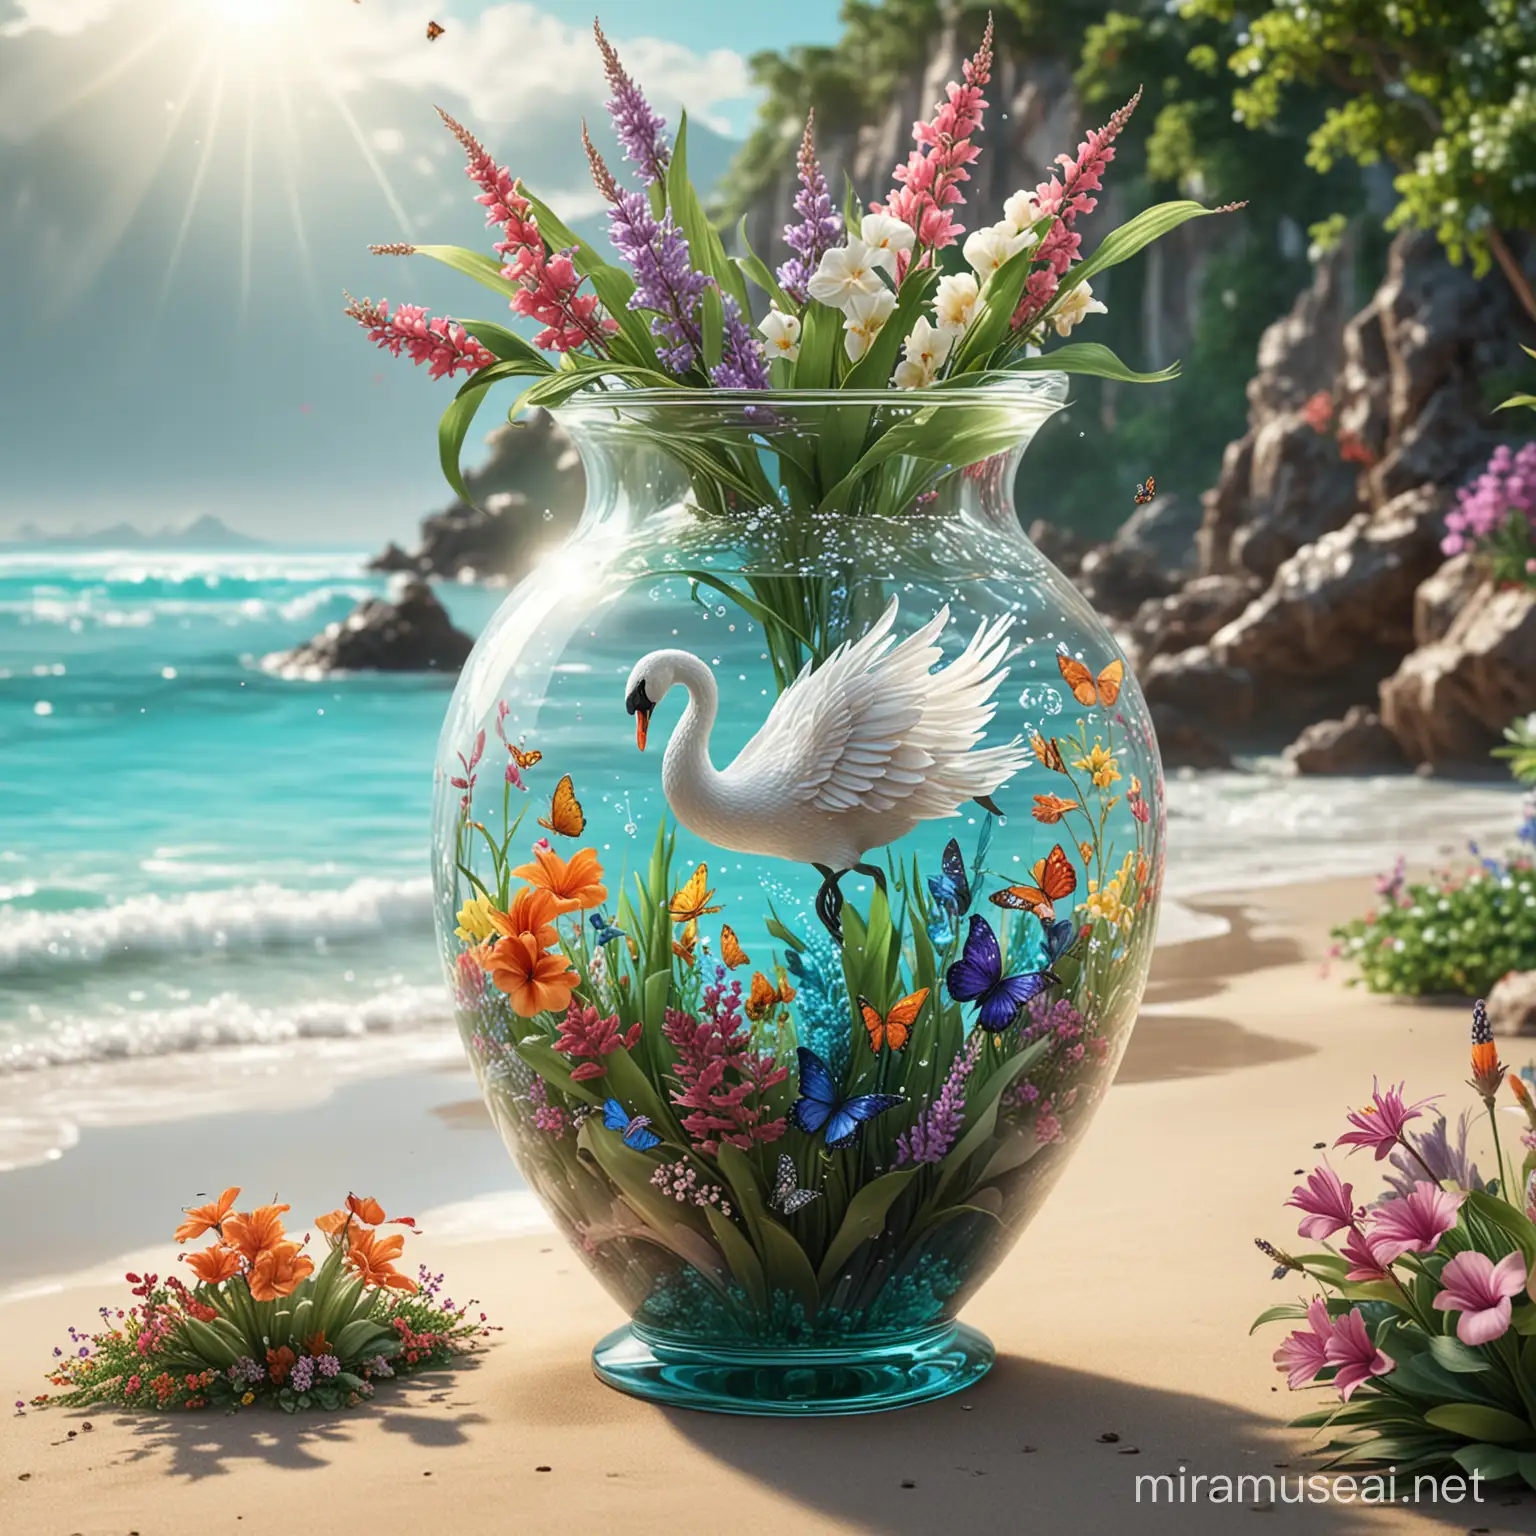 The 3D glass swan background is next to the beach and the excellent quality is 8K Ultra HD
There are many colorful flowers and green plants inside this beautiful vase, and a mermaid and some butterflies are flying above the flowers.